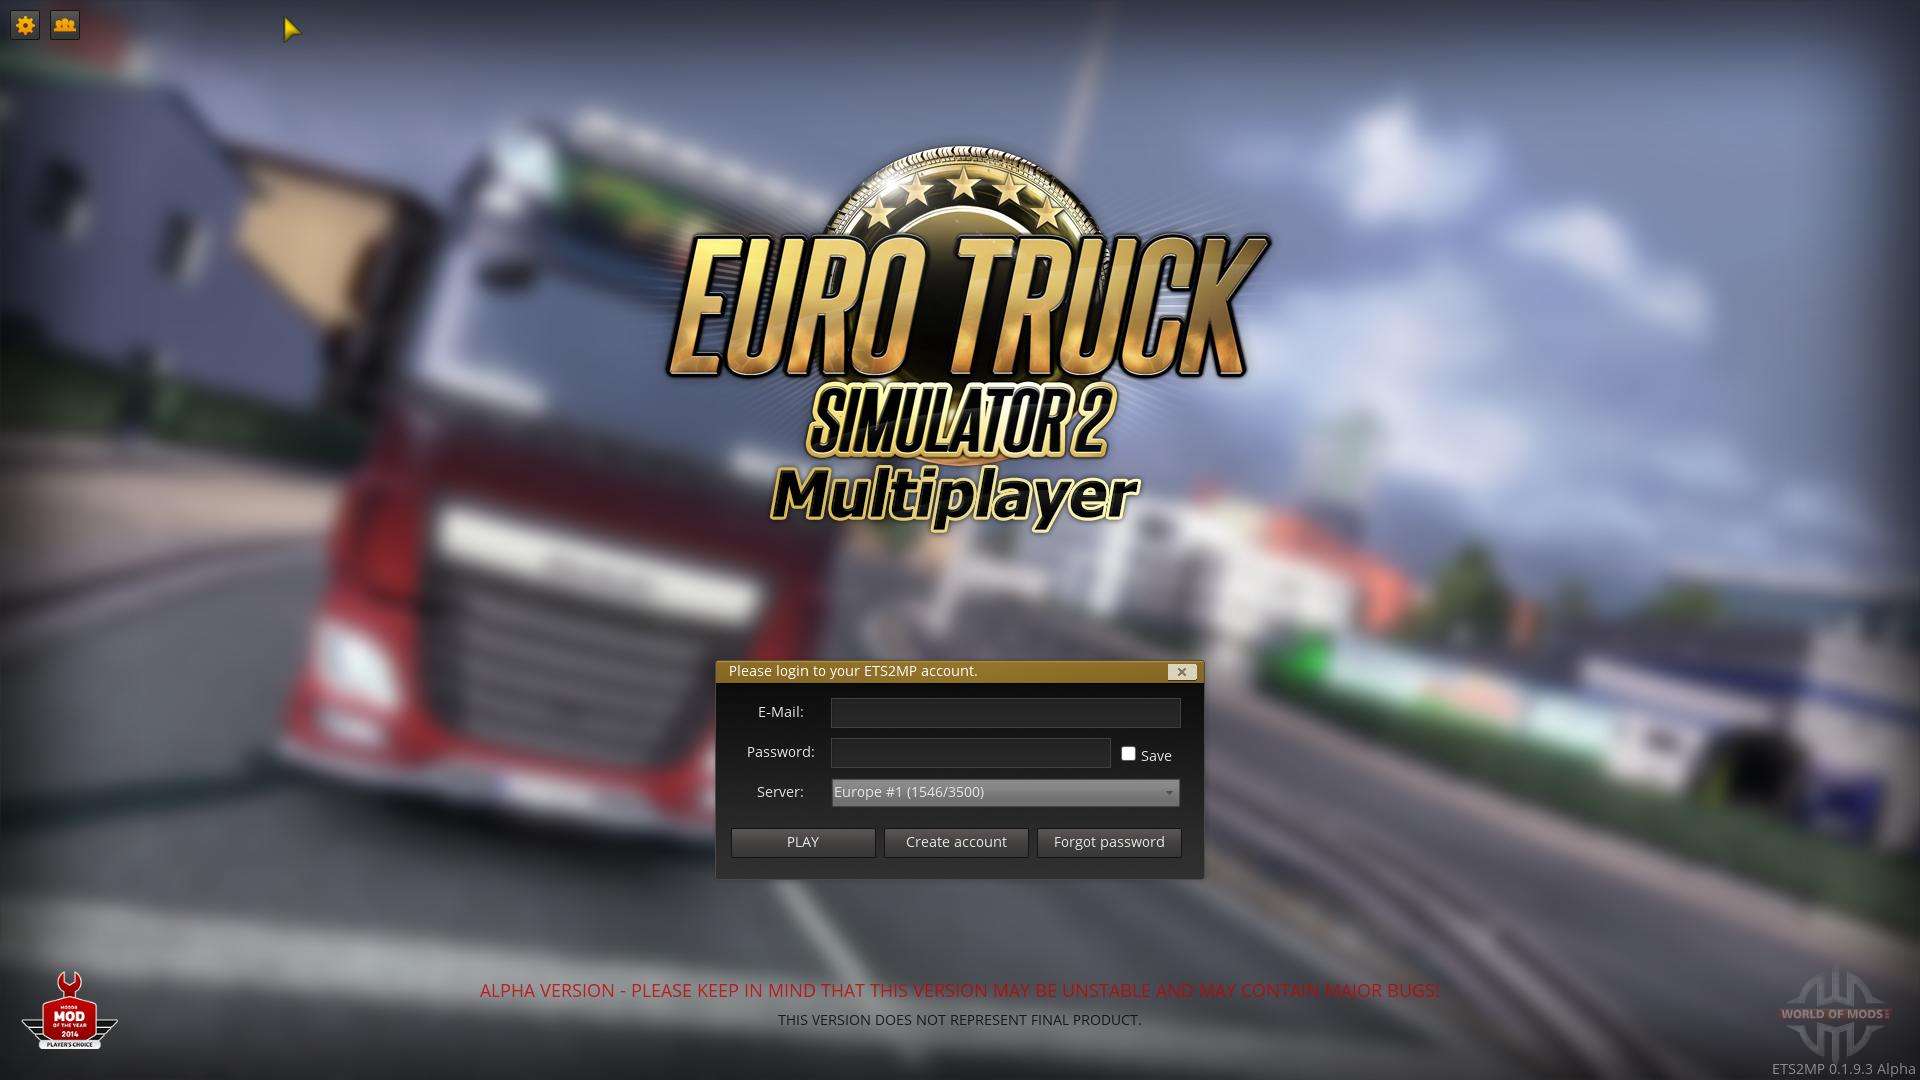 How to play Euro Truck Simulator 2 online - ETS 2 multiplayer